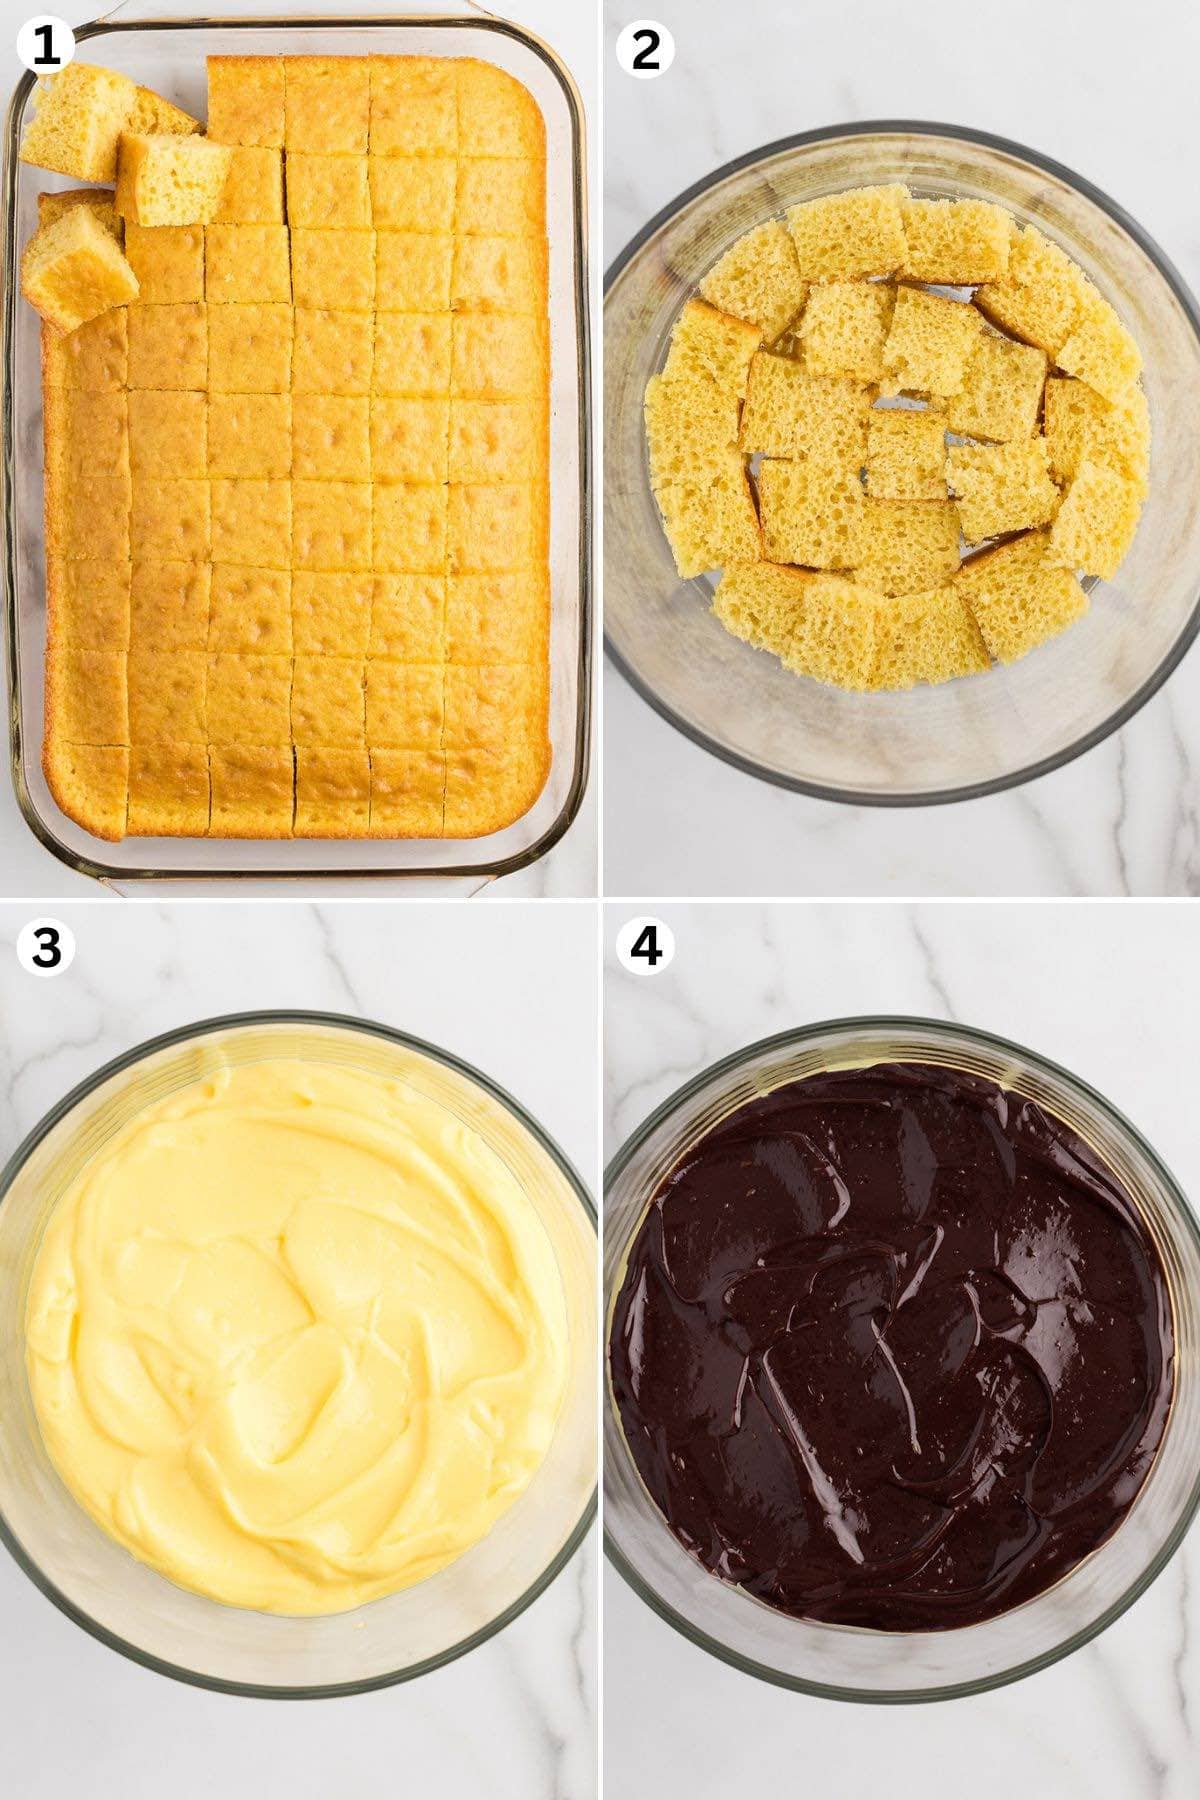 Cut the yellow cake into cubes. Add a single layer of cubed cake to the bottom of a trifle bowl. Spread the pudding over the cake. Drizzle a layer of the chocolate filling over the pudding layer.